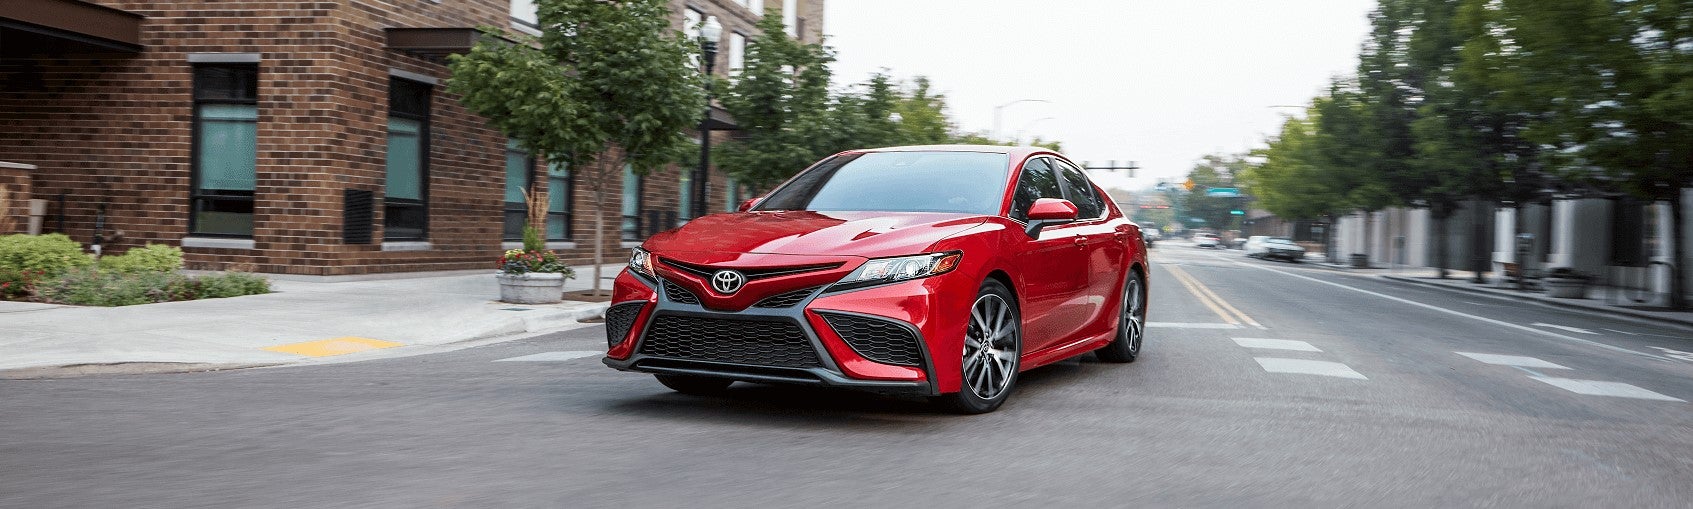 2021 Toyota Camry Review Avon IN